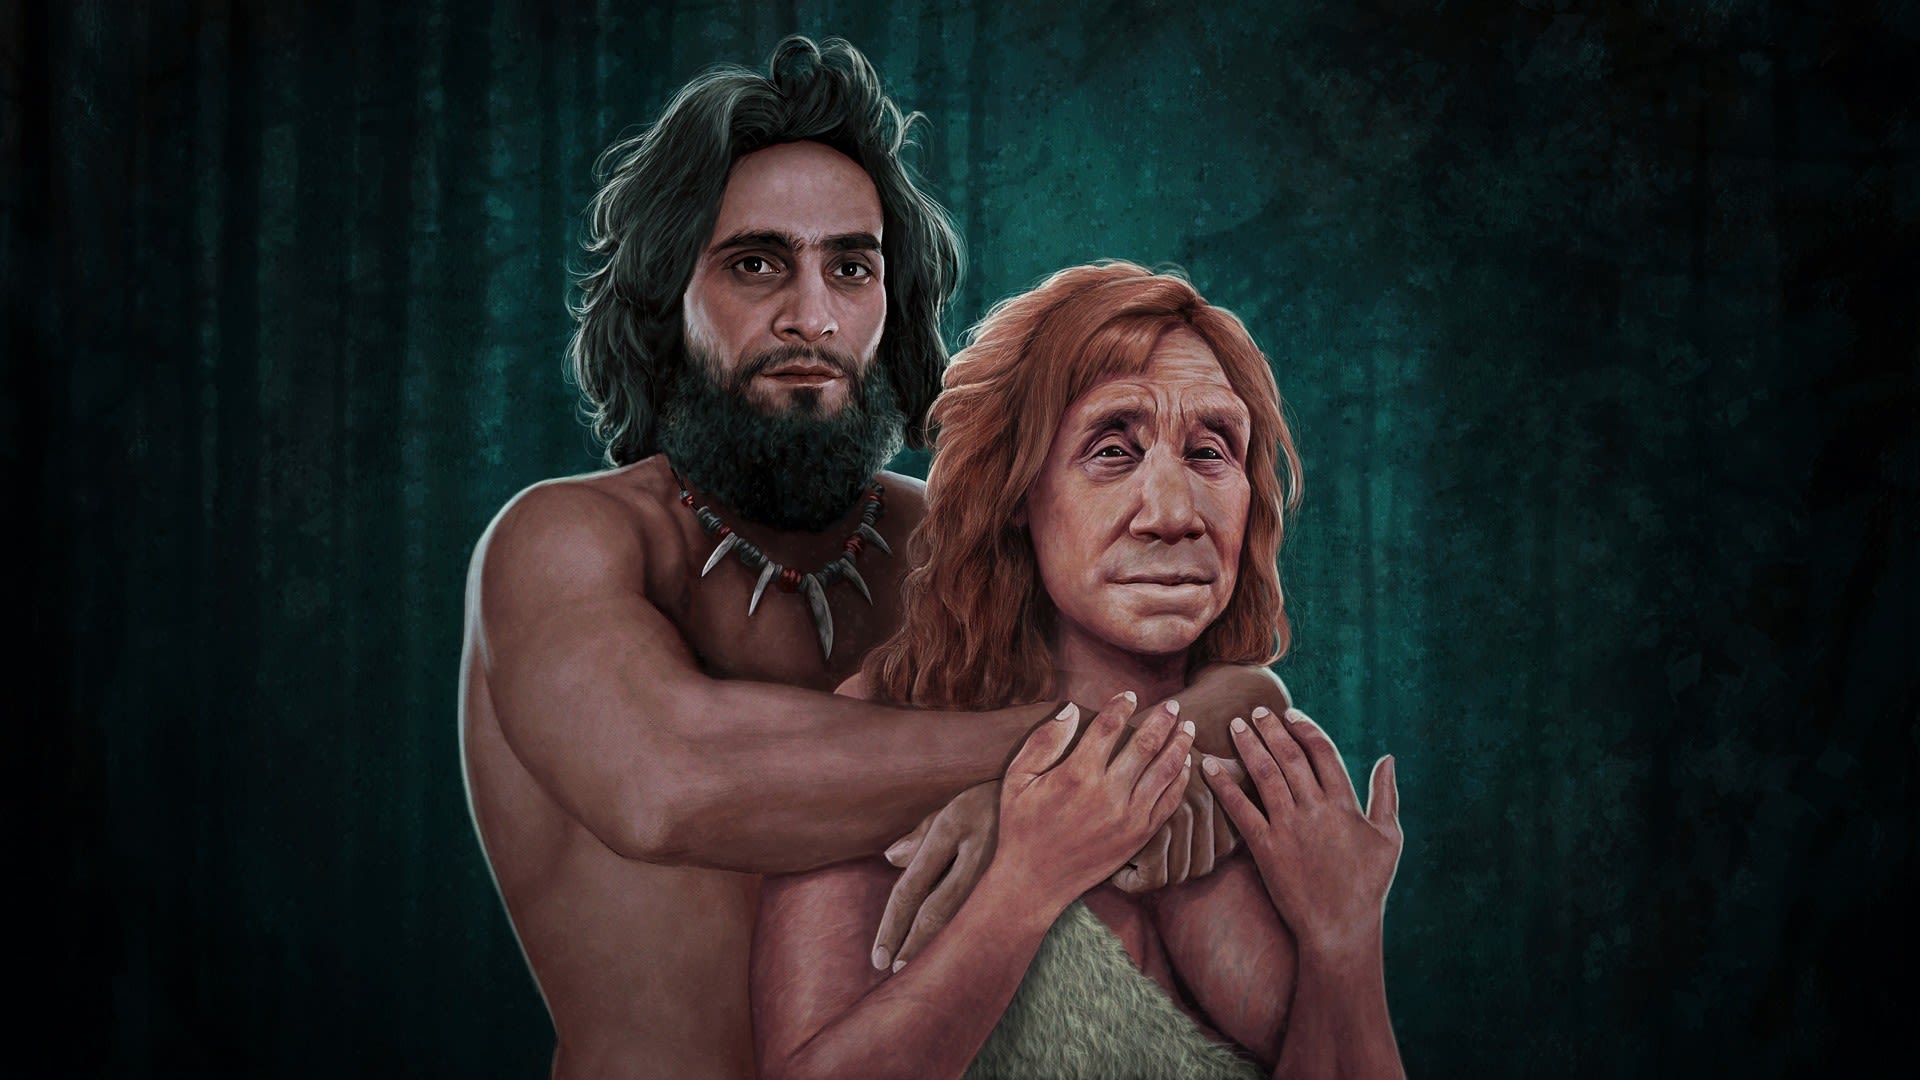 'More Neanderthal than human': How your health may depend on DNA from our long-lost ancestors